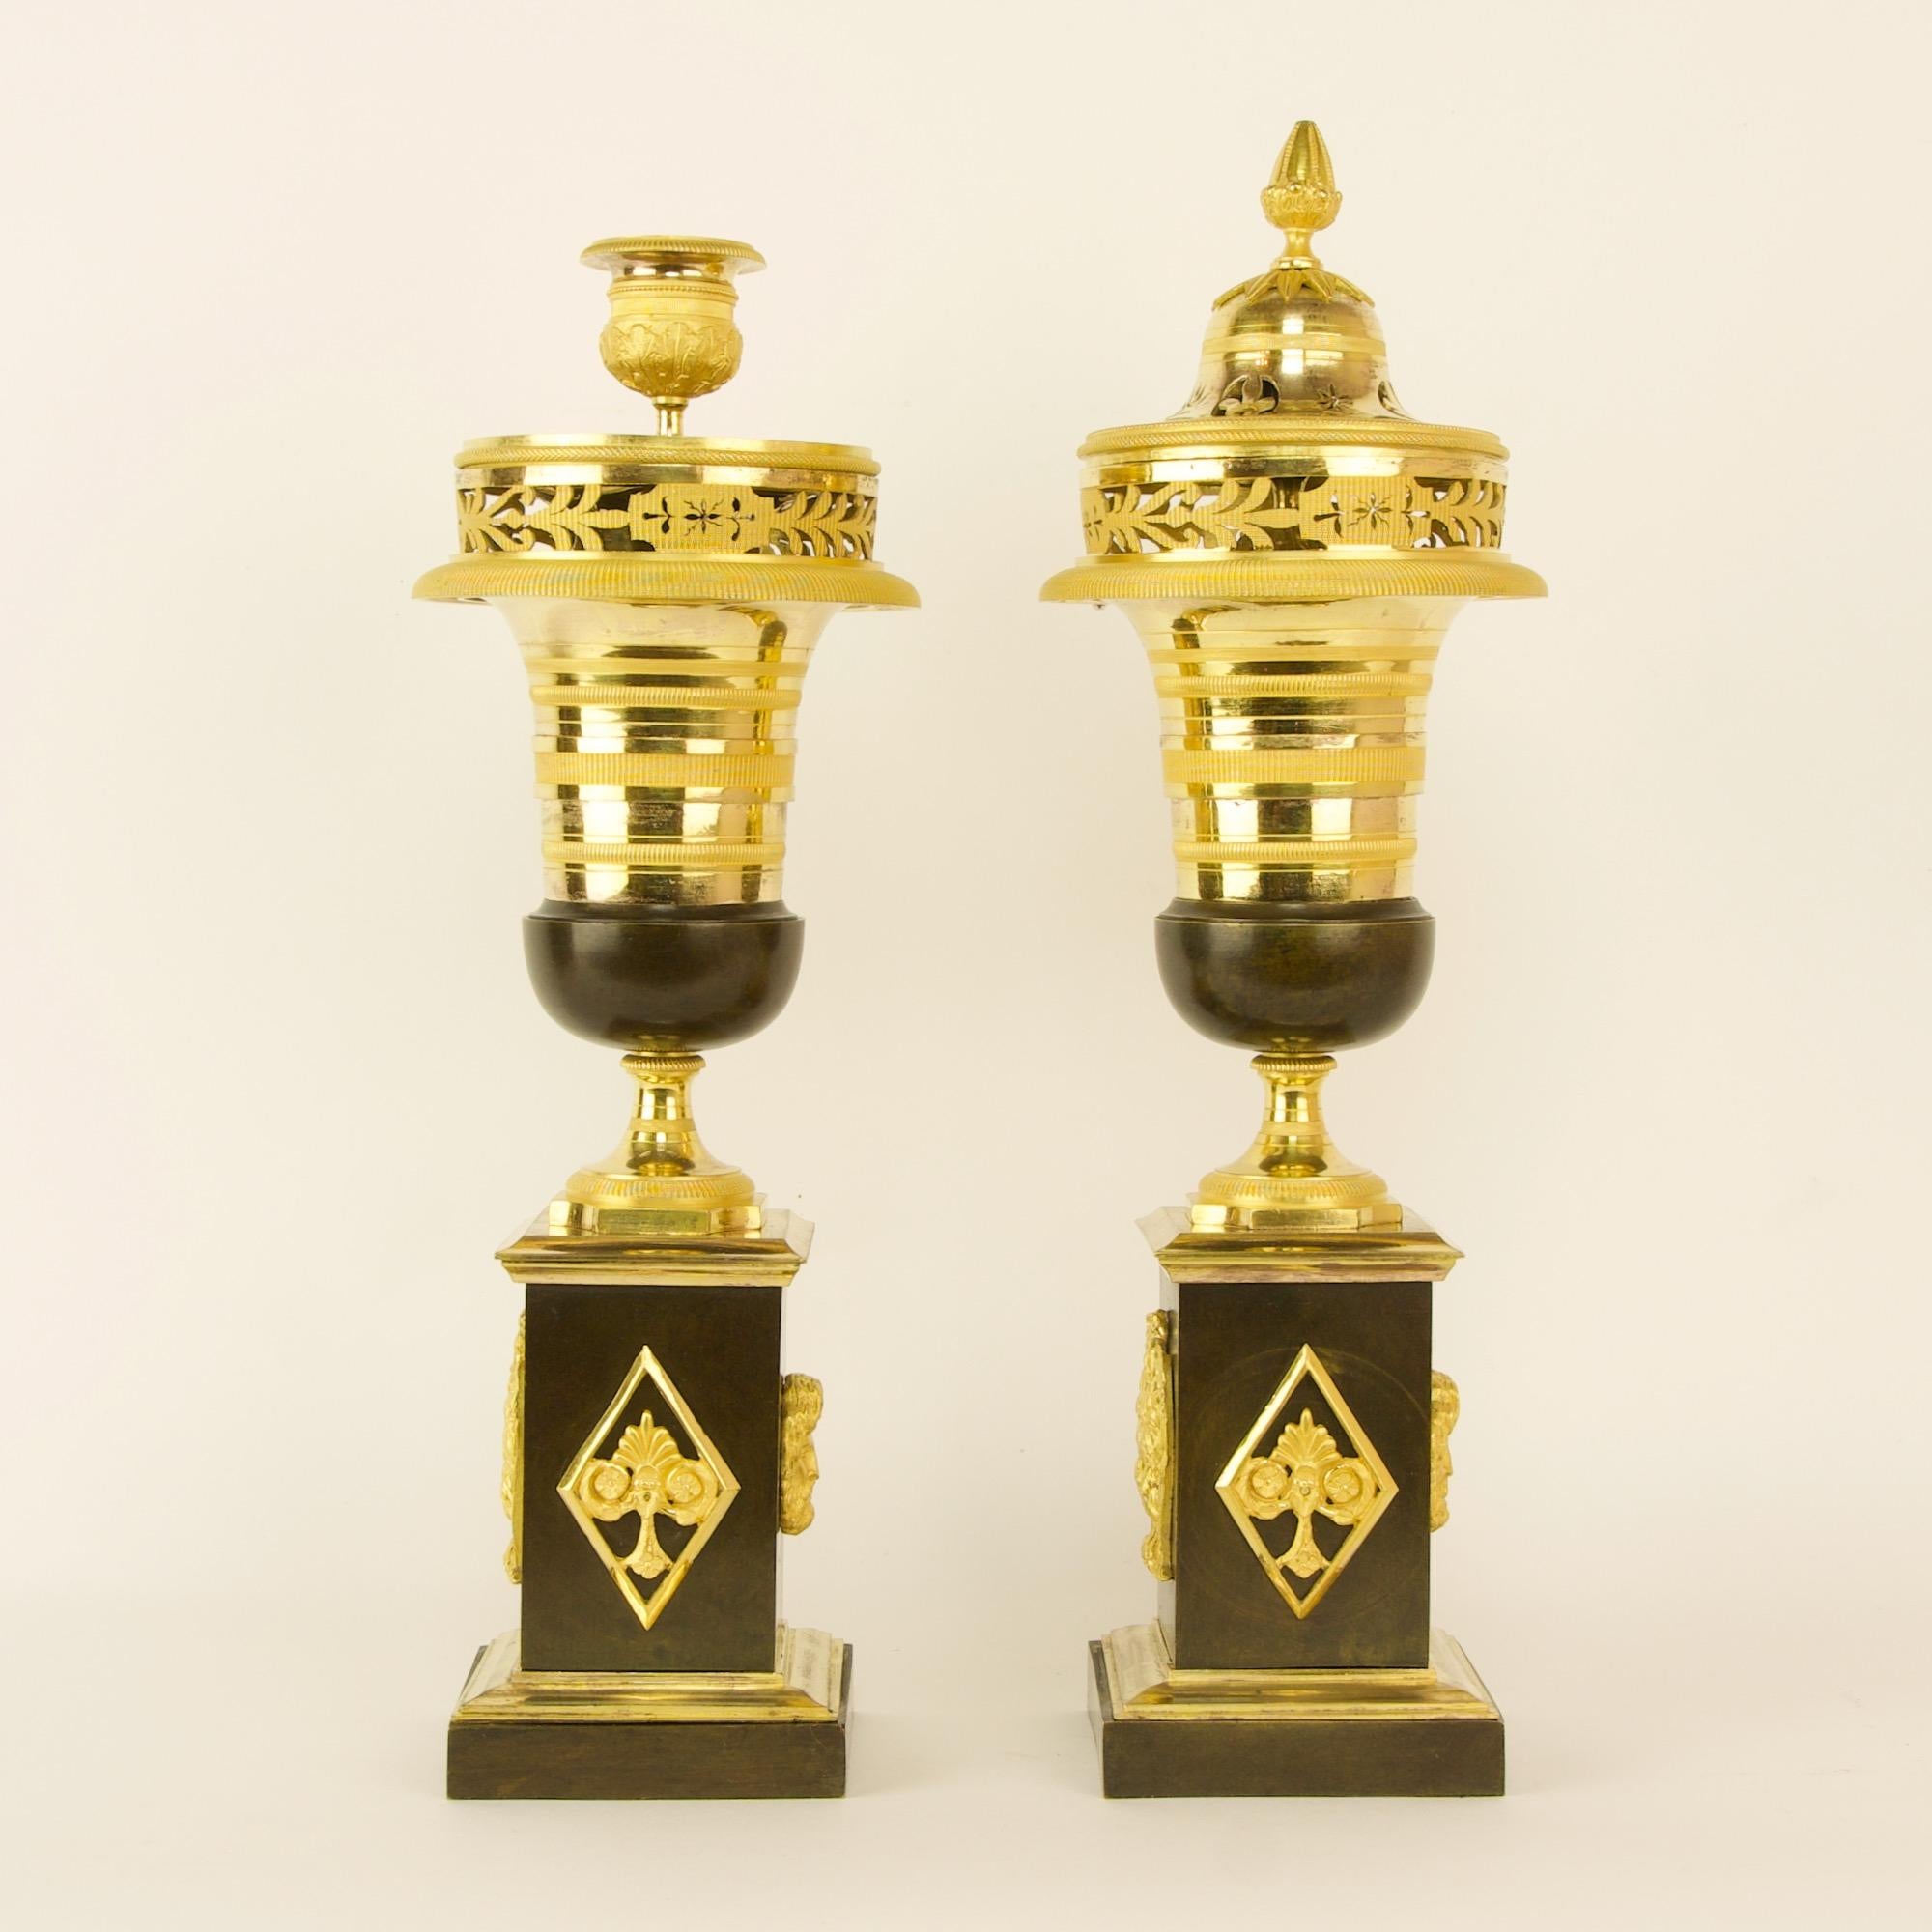 Pair of Early 19th Century French Empire Gilt and Patinated Bronze Cassolettes 2